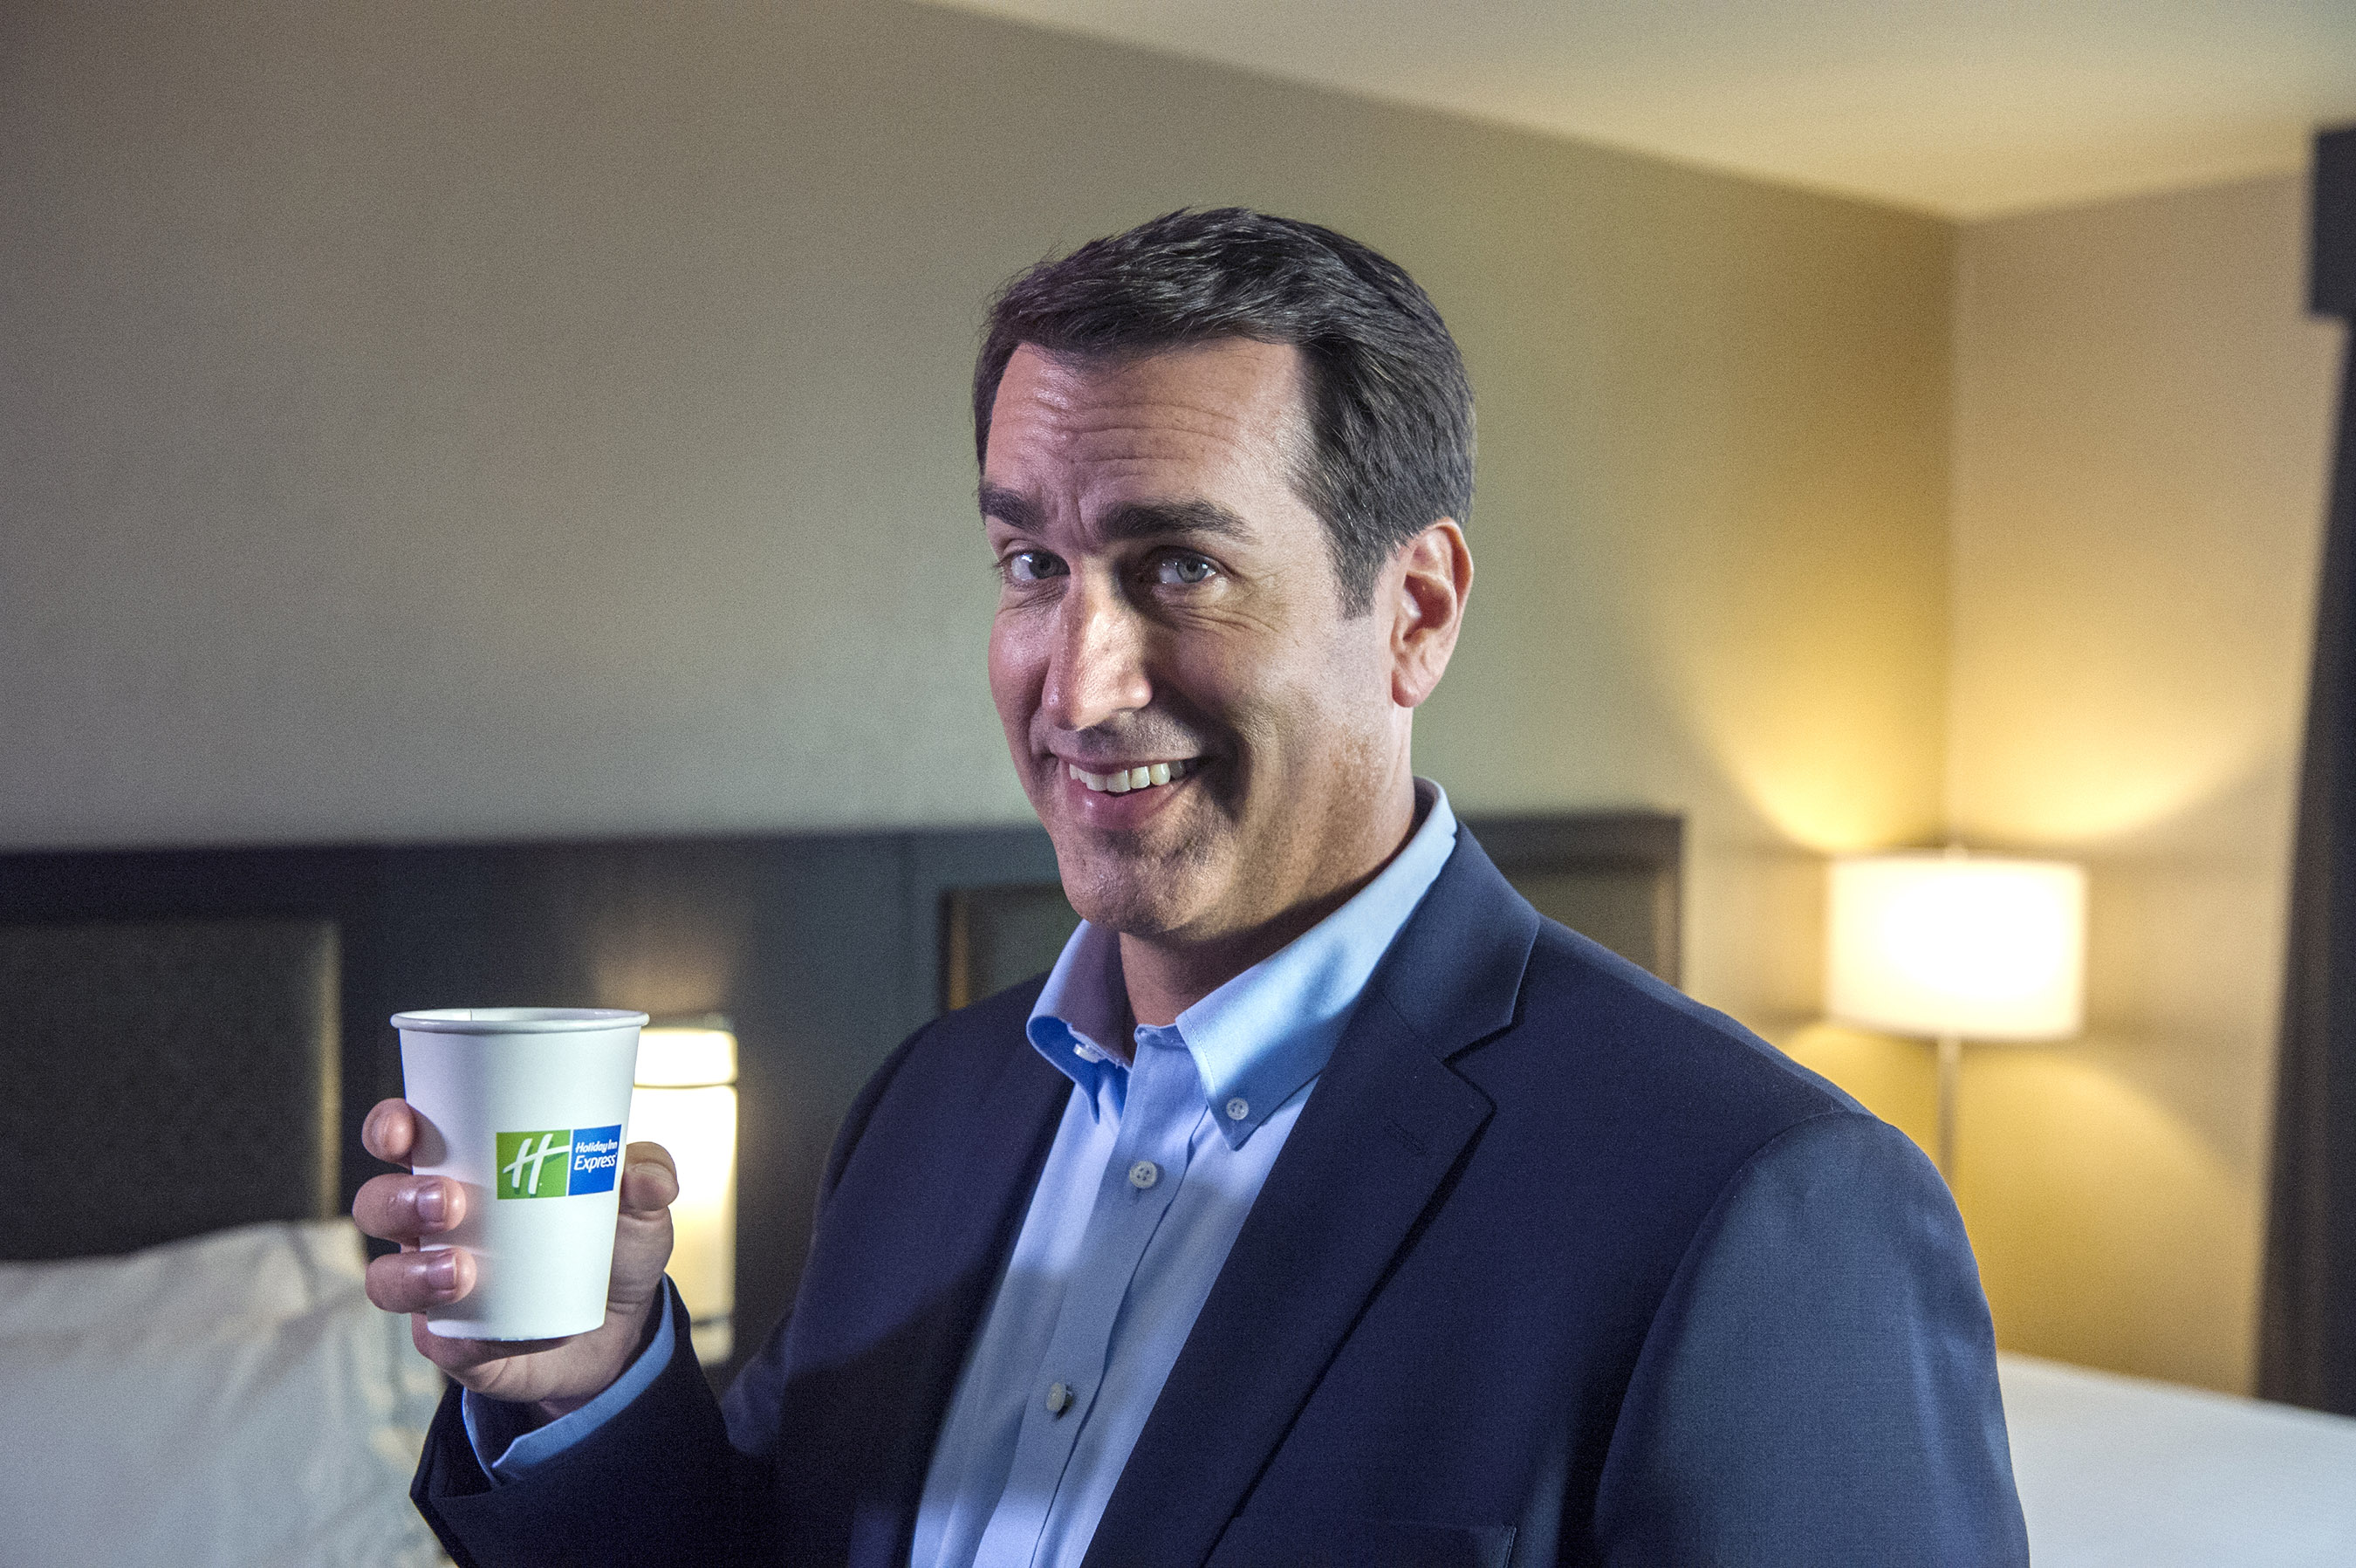 Rob Riggle, Actor/Comedian